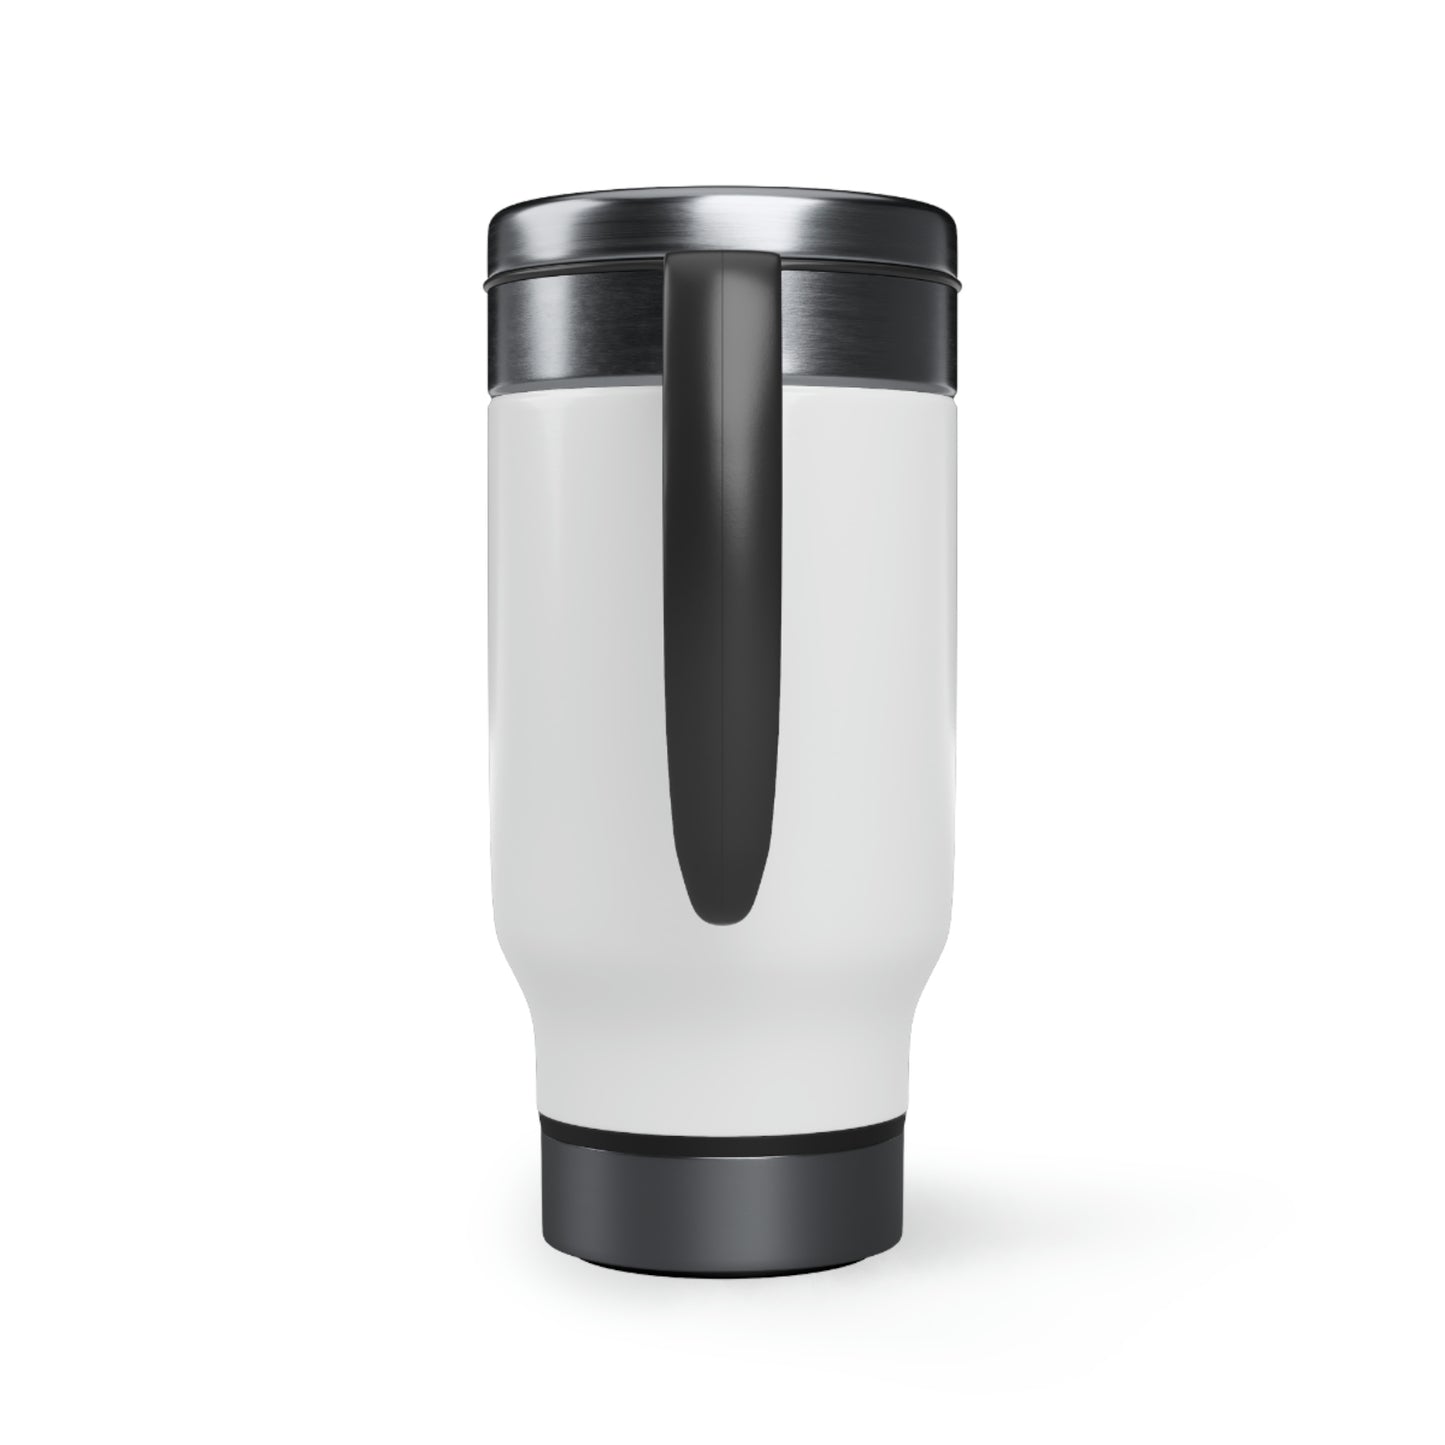 "Booktrovert" Stainless Steel Travel Mug with Handle, 14oz